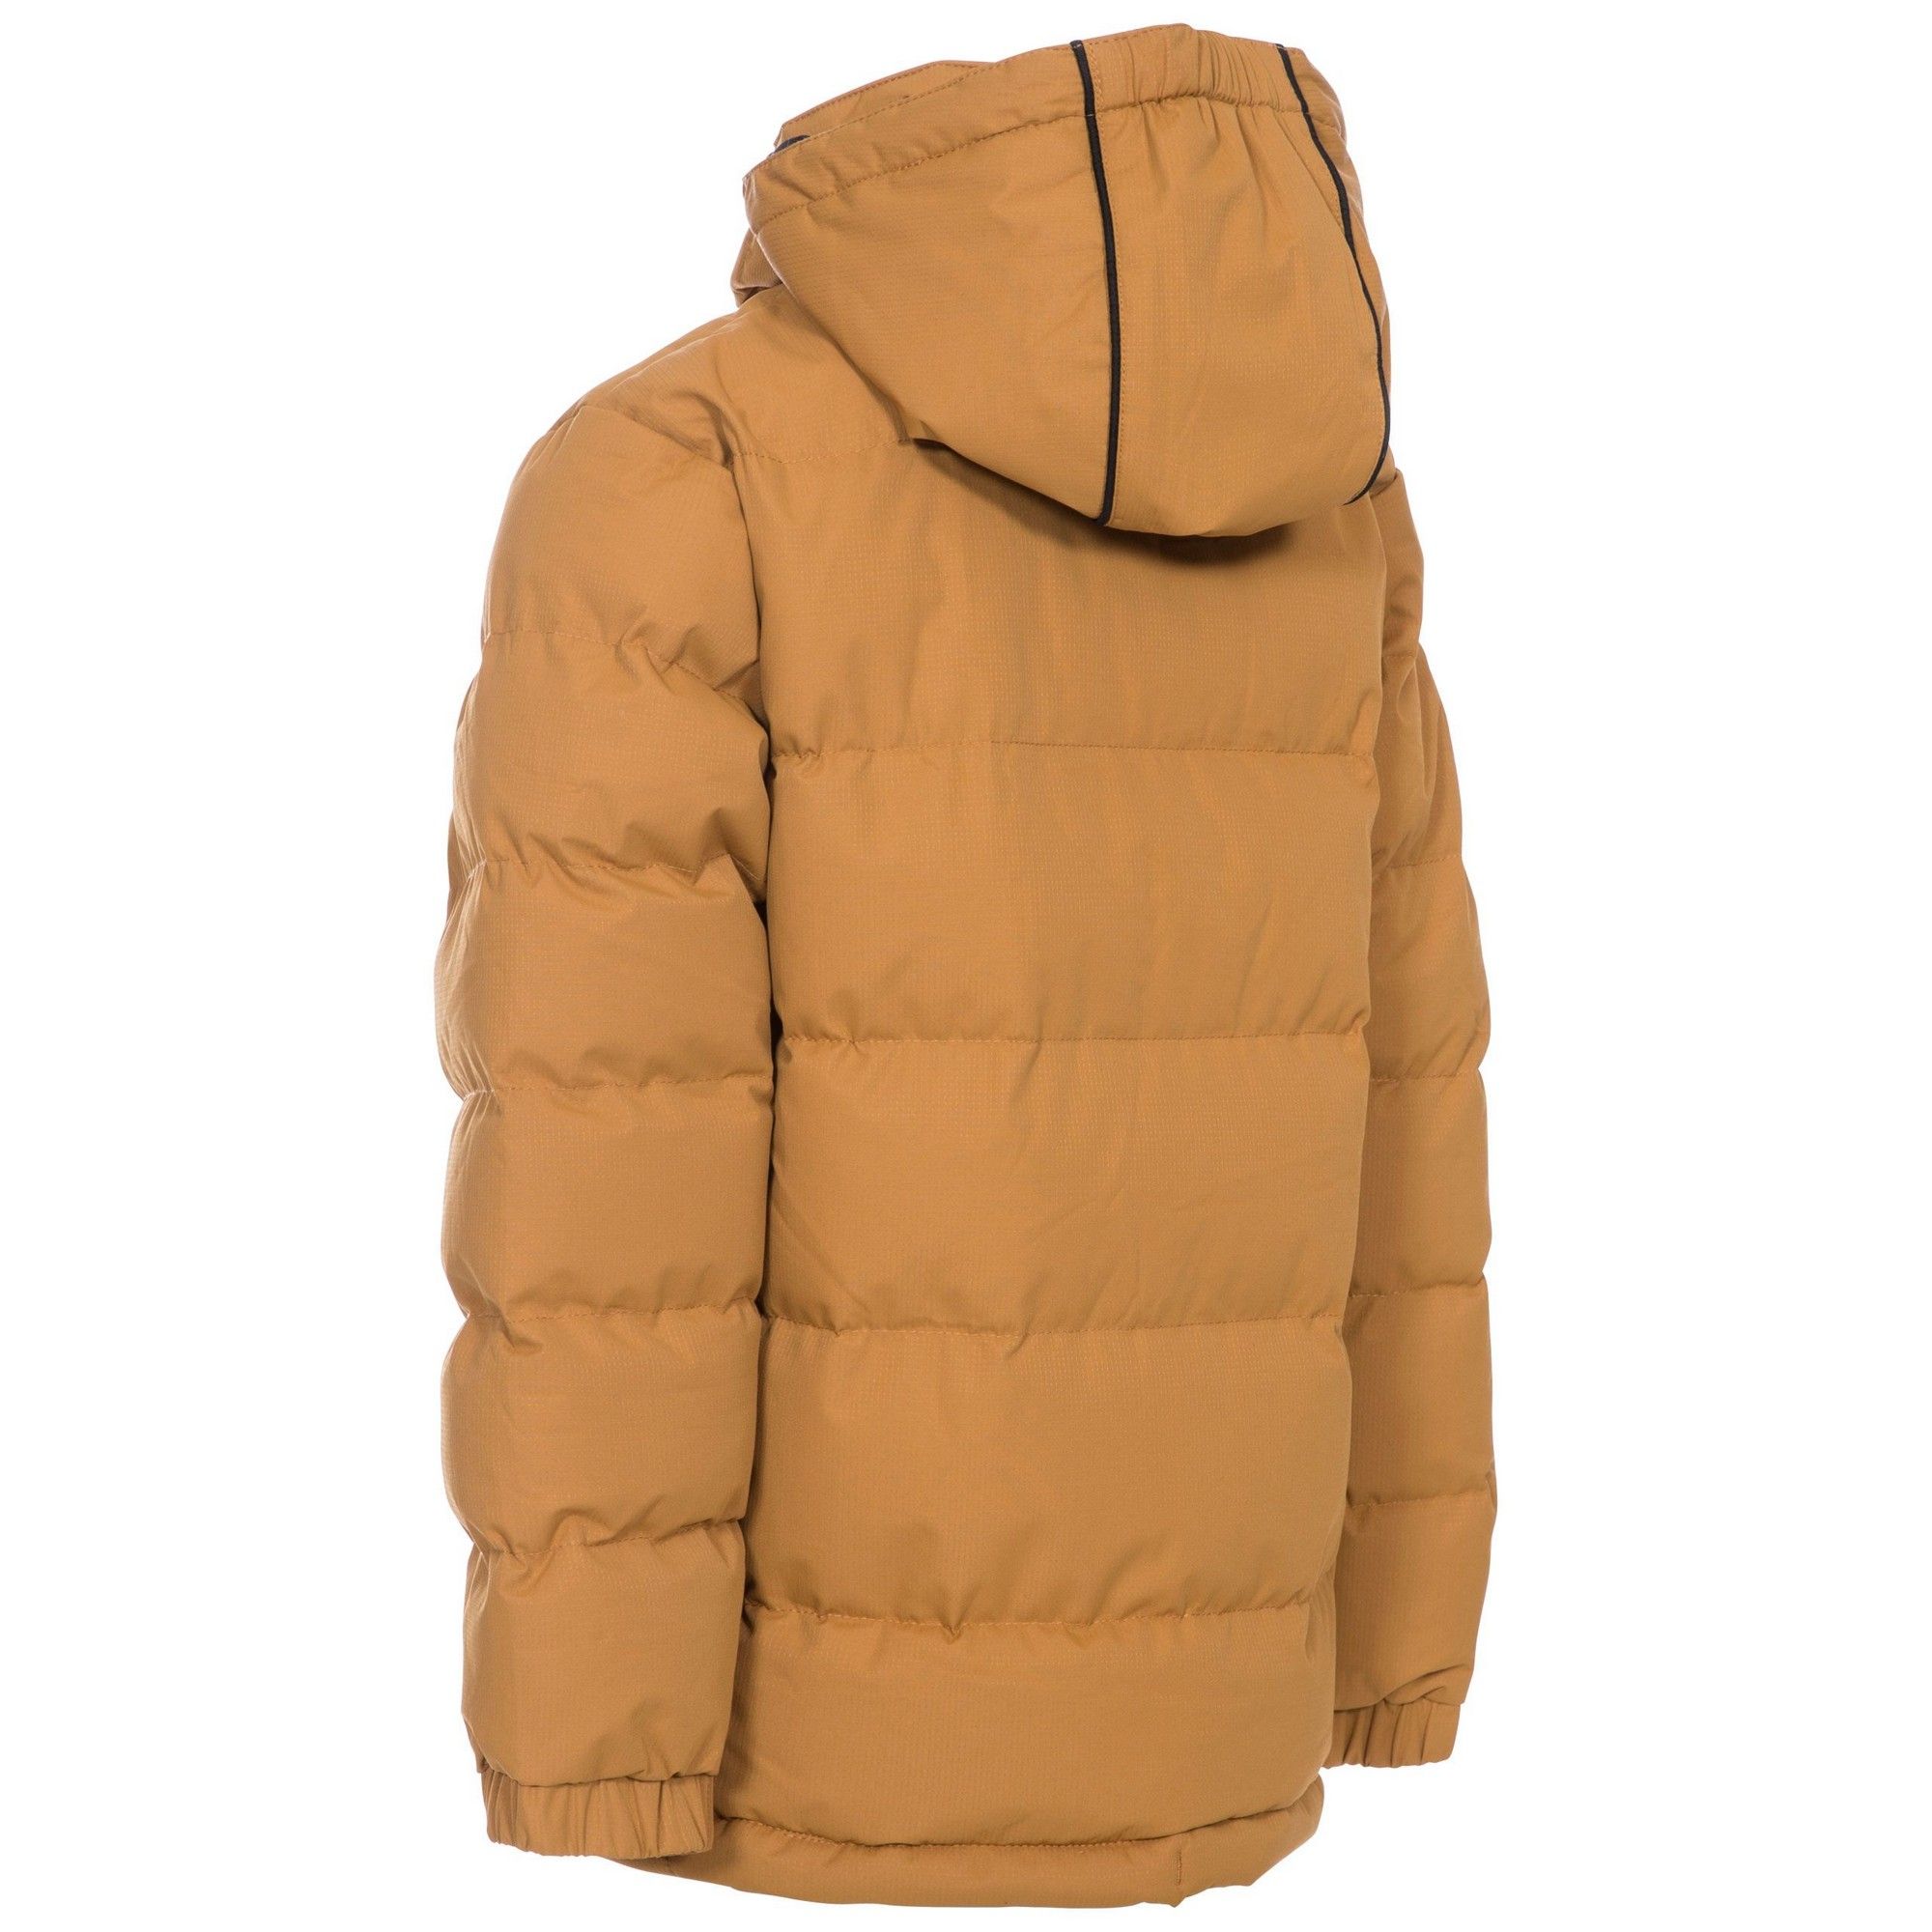 Boys padded jacket with ColdHeat insulation. Adjustable zip off hood. 3 x profile low zipped pockets. Low profile centre front zip. Drawcord hem. Elasticated cuffs. Ideal for wearing outside on a cold day. 100% Polyester.